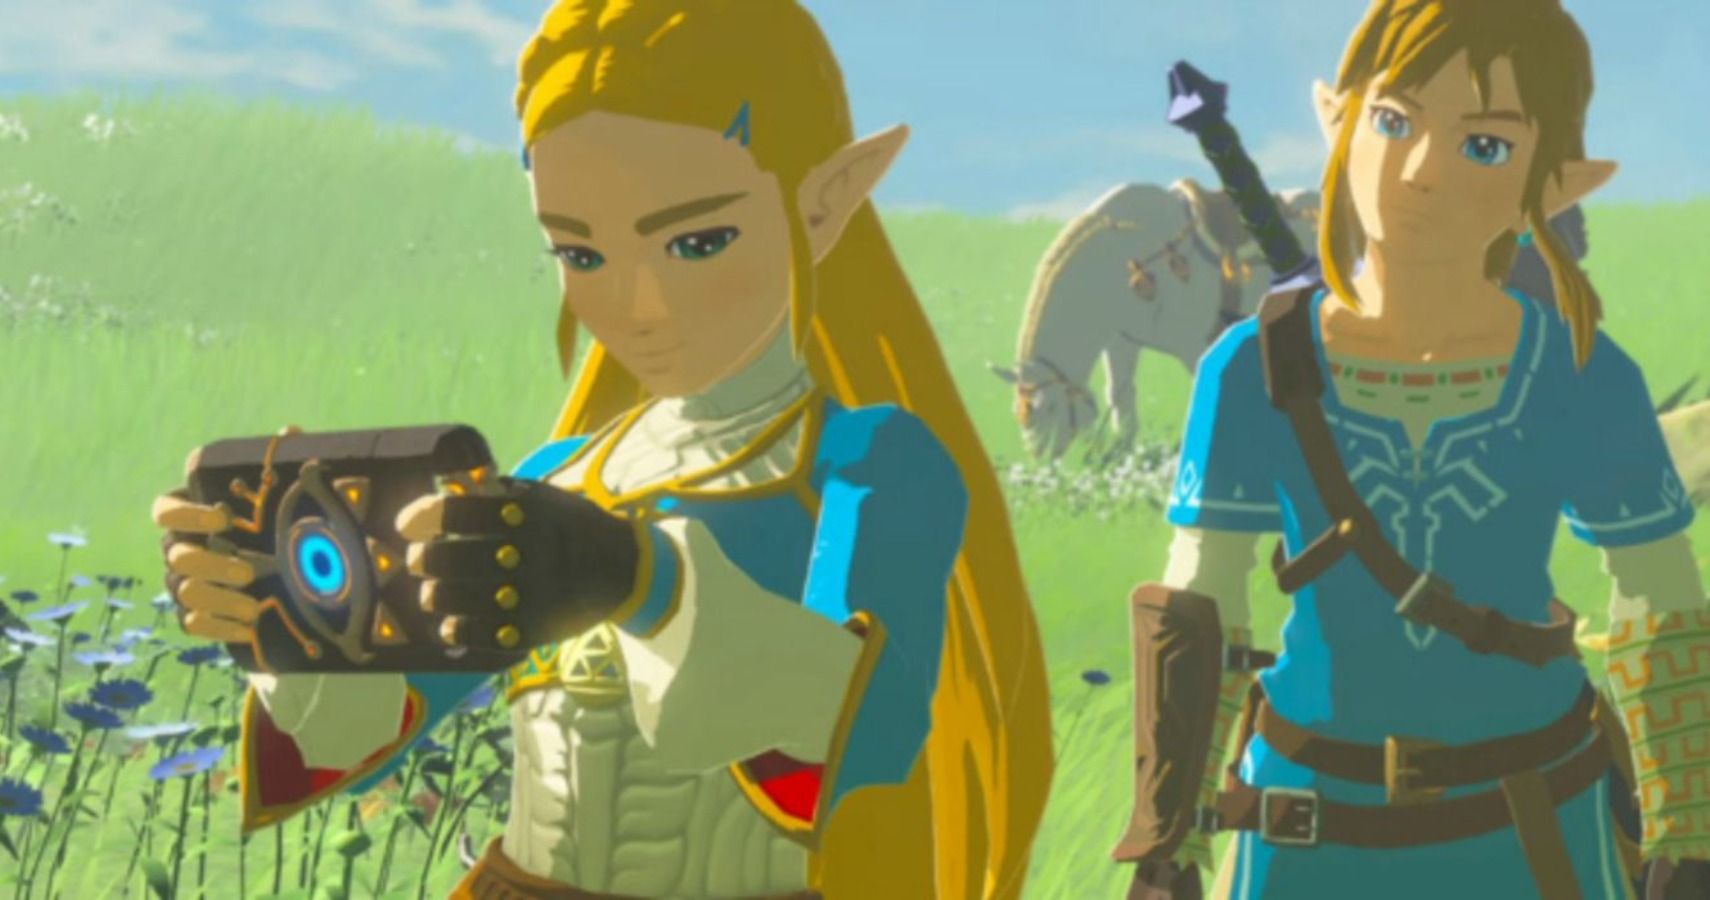 how to play breath of the wild on pc 2020